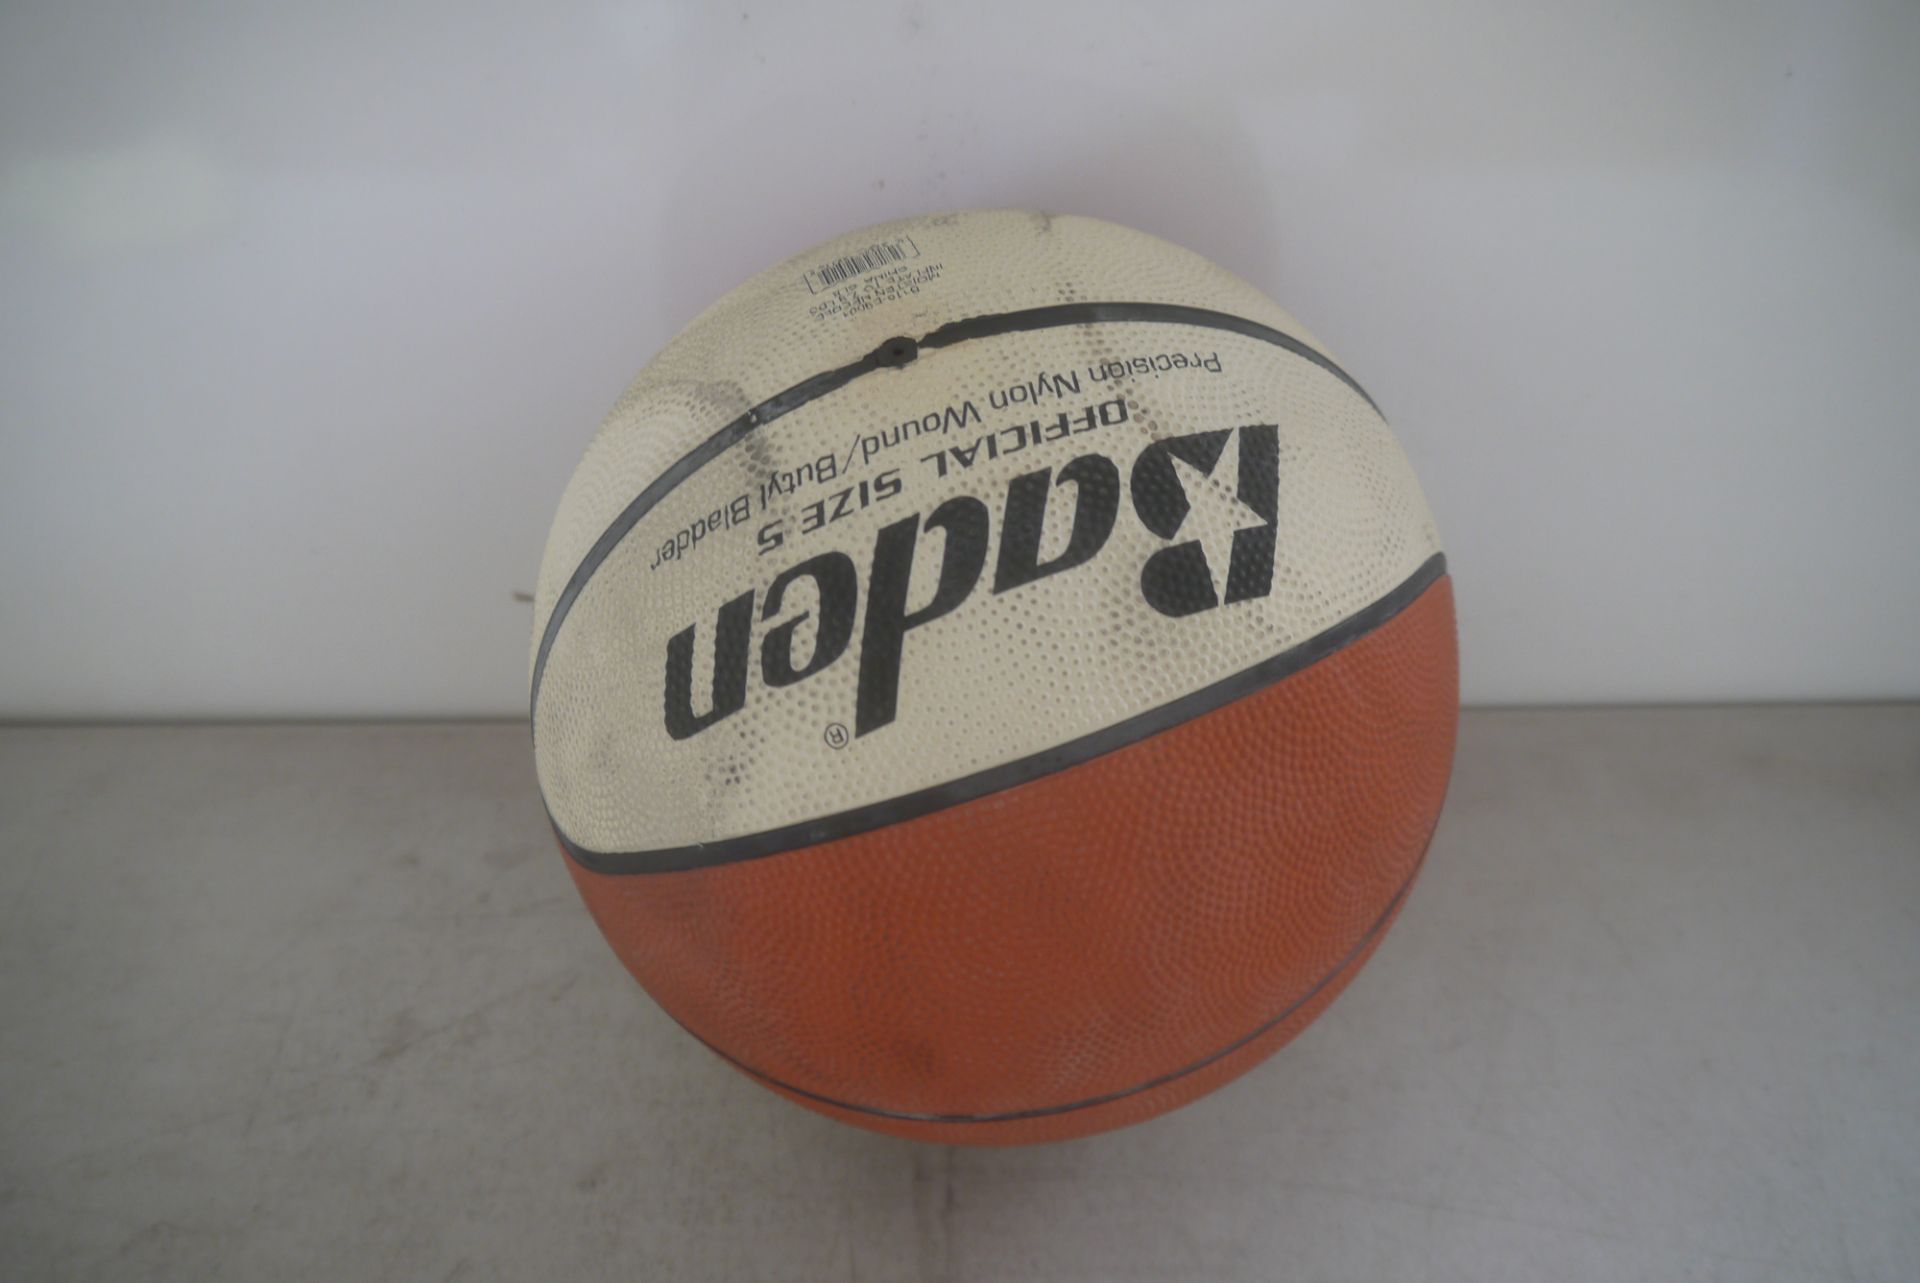 5x Baden size 5 basketballs, all new and unused. Total RRP £44.95.